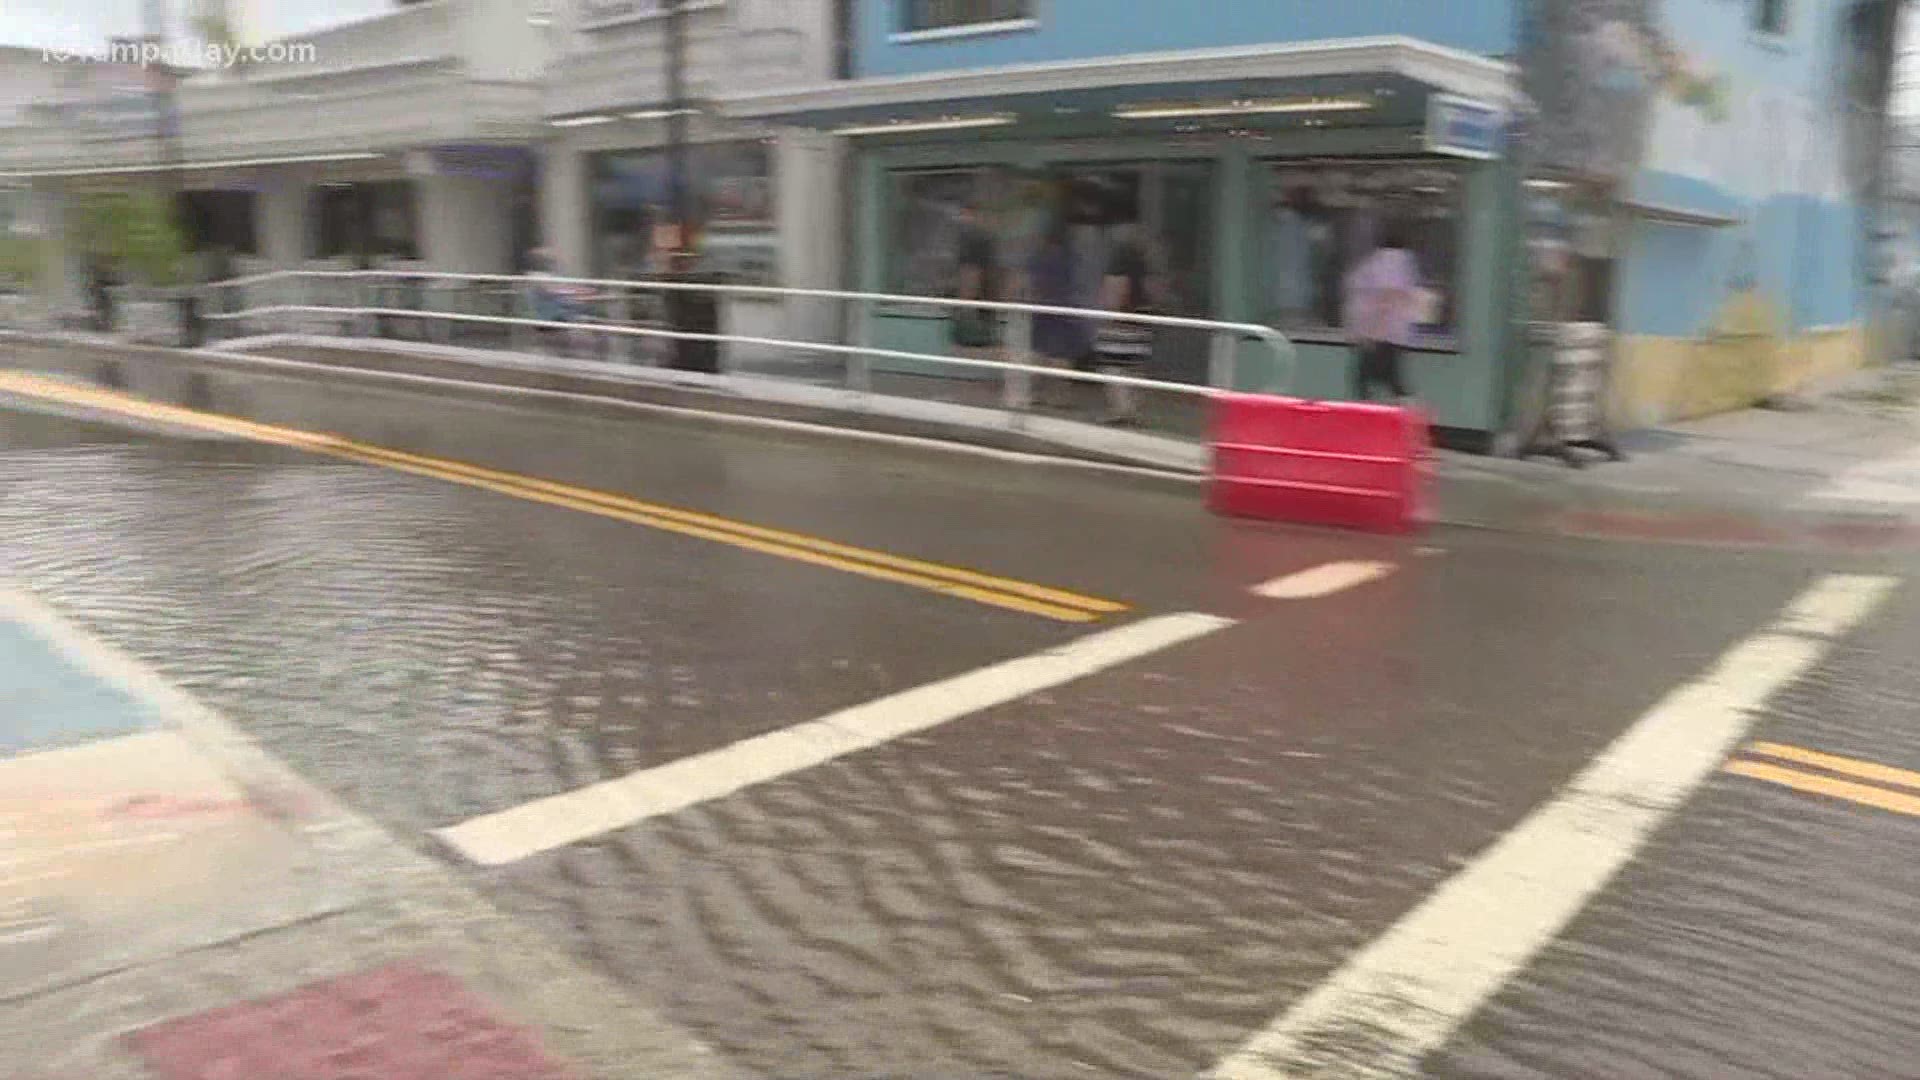 The Tampa Bay area saw reports of localized flooding, but no other reports of major damage.